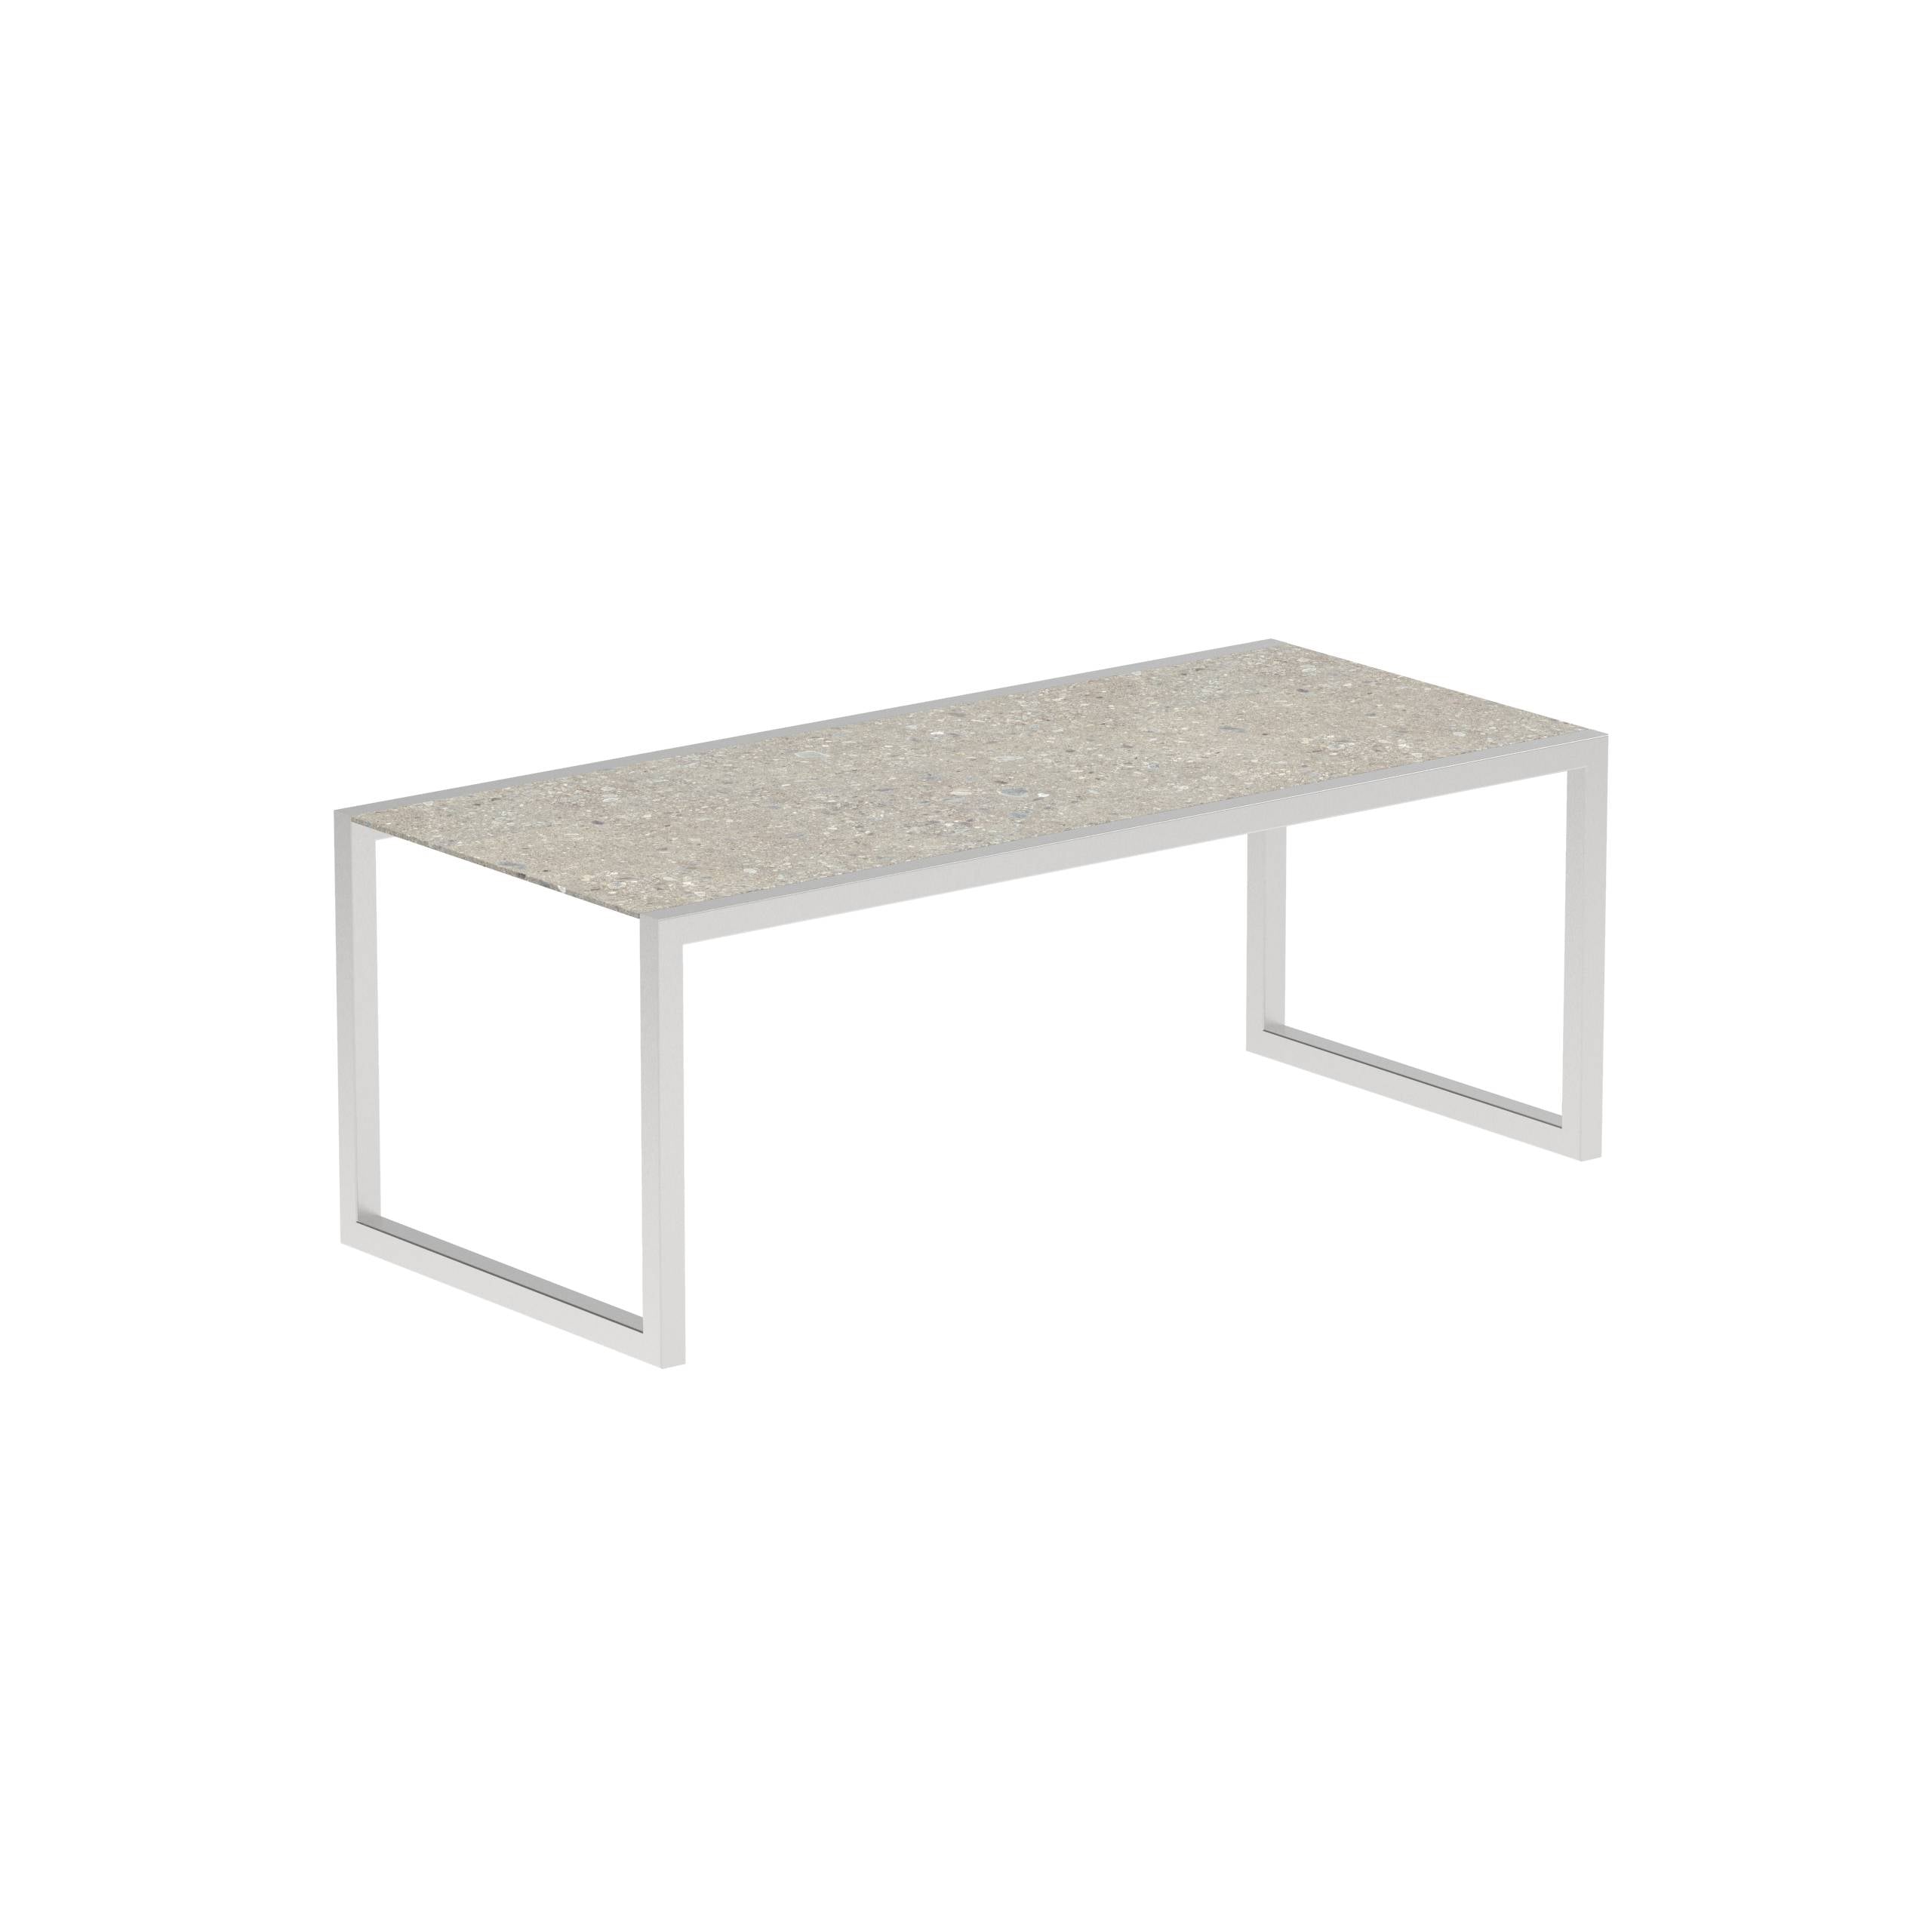 Ninix Table 200x90cm With Stainless Steel And Ceramic Ceppo Dolomitica